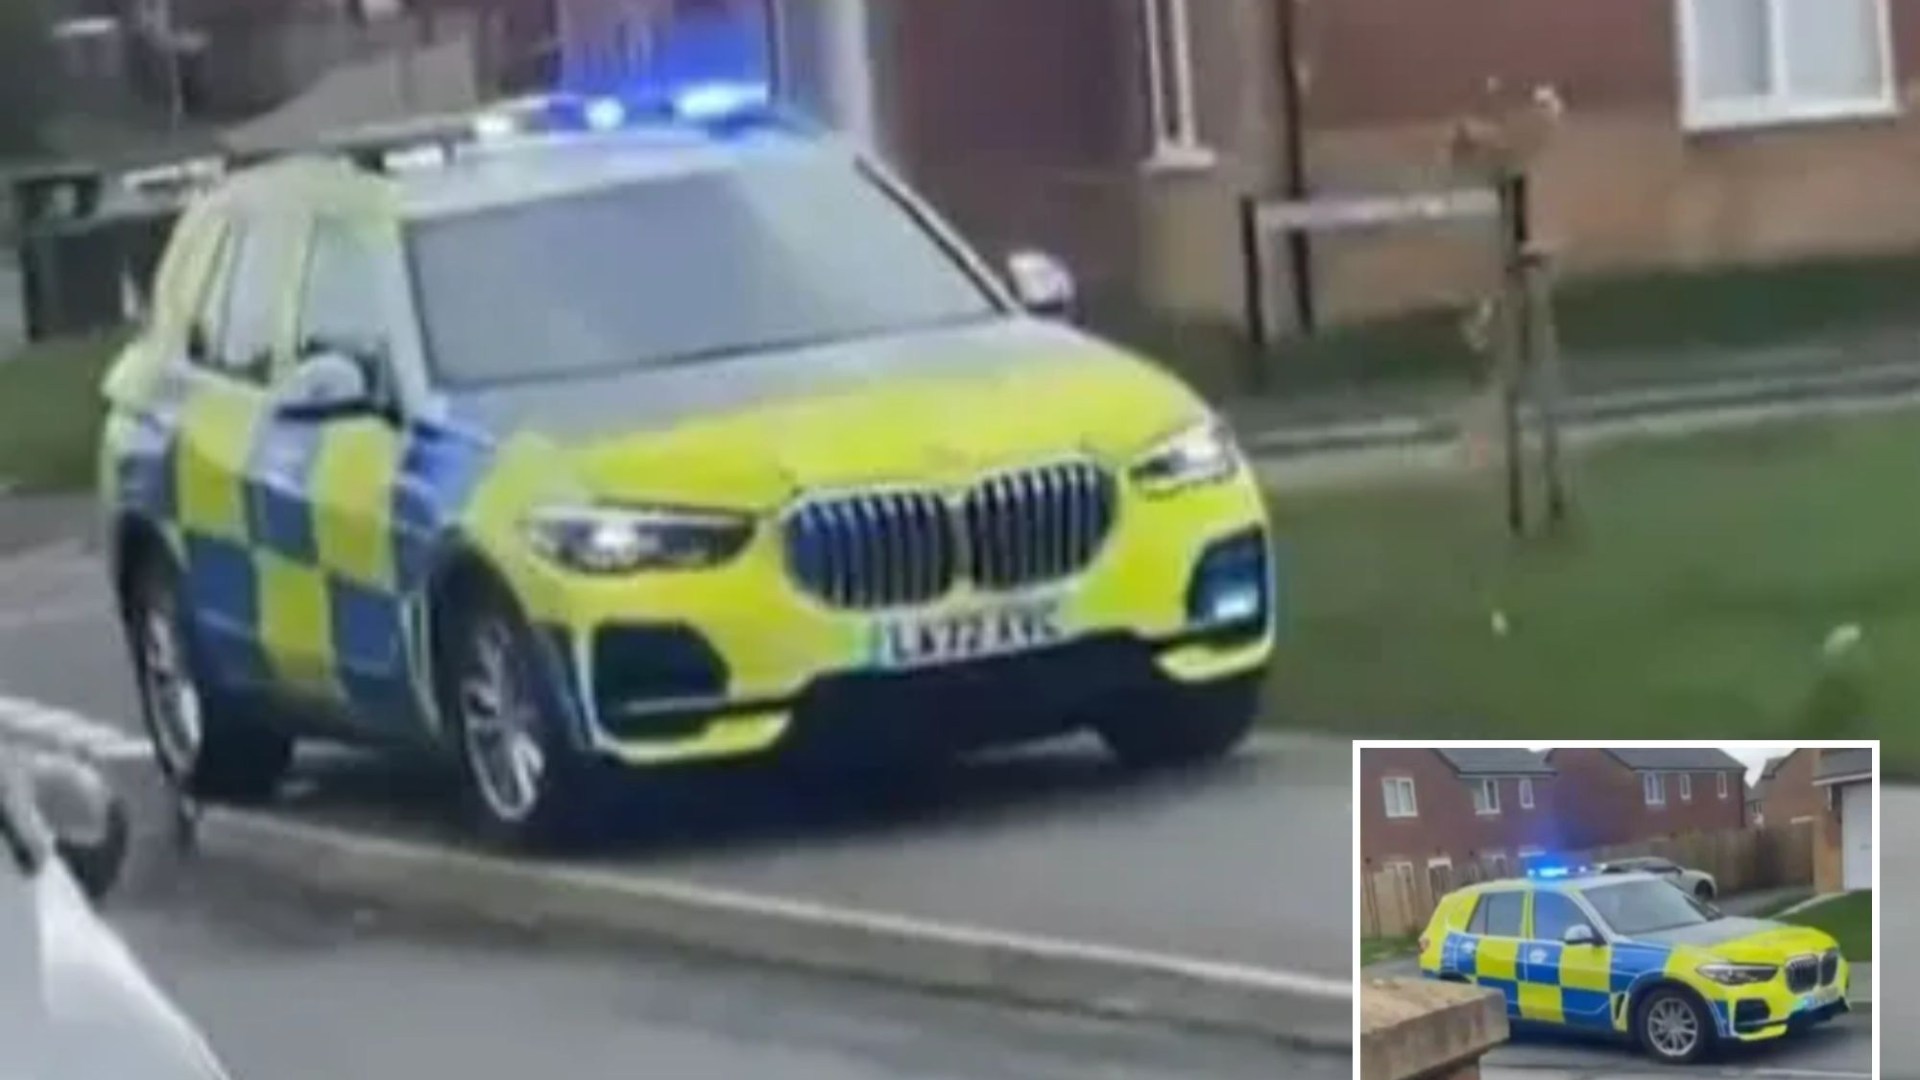 Unbelievable: Children steal police car as officers detain suspect nearby, watch as vehicle reverses recklessly in shocking footage